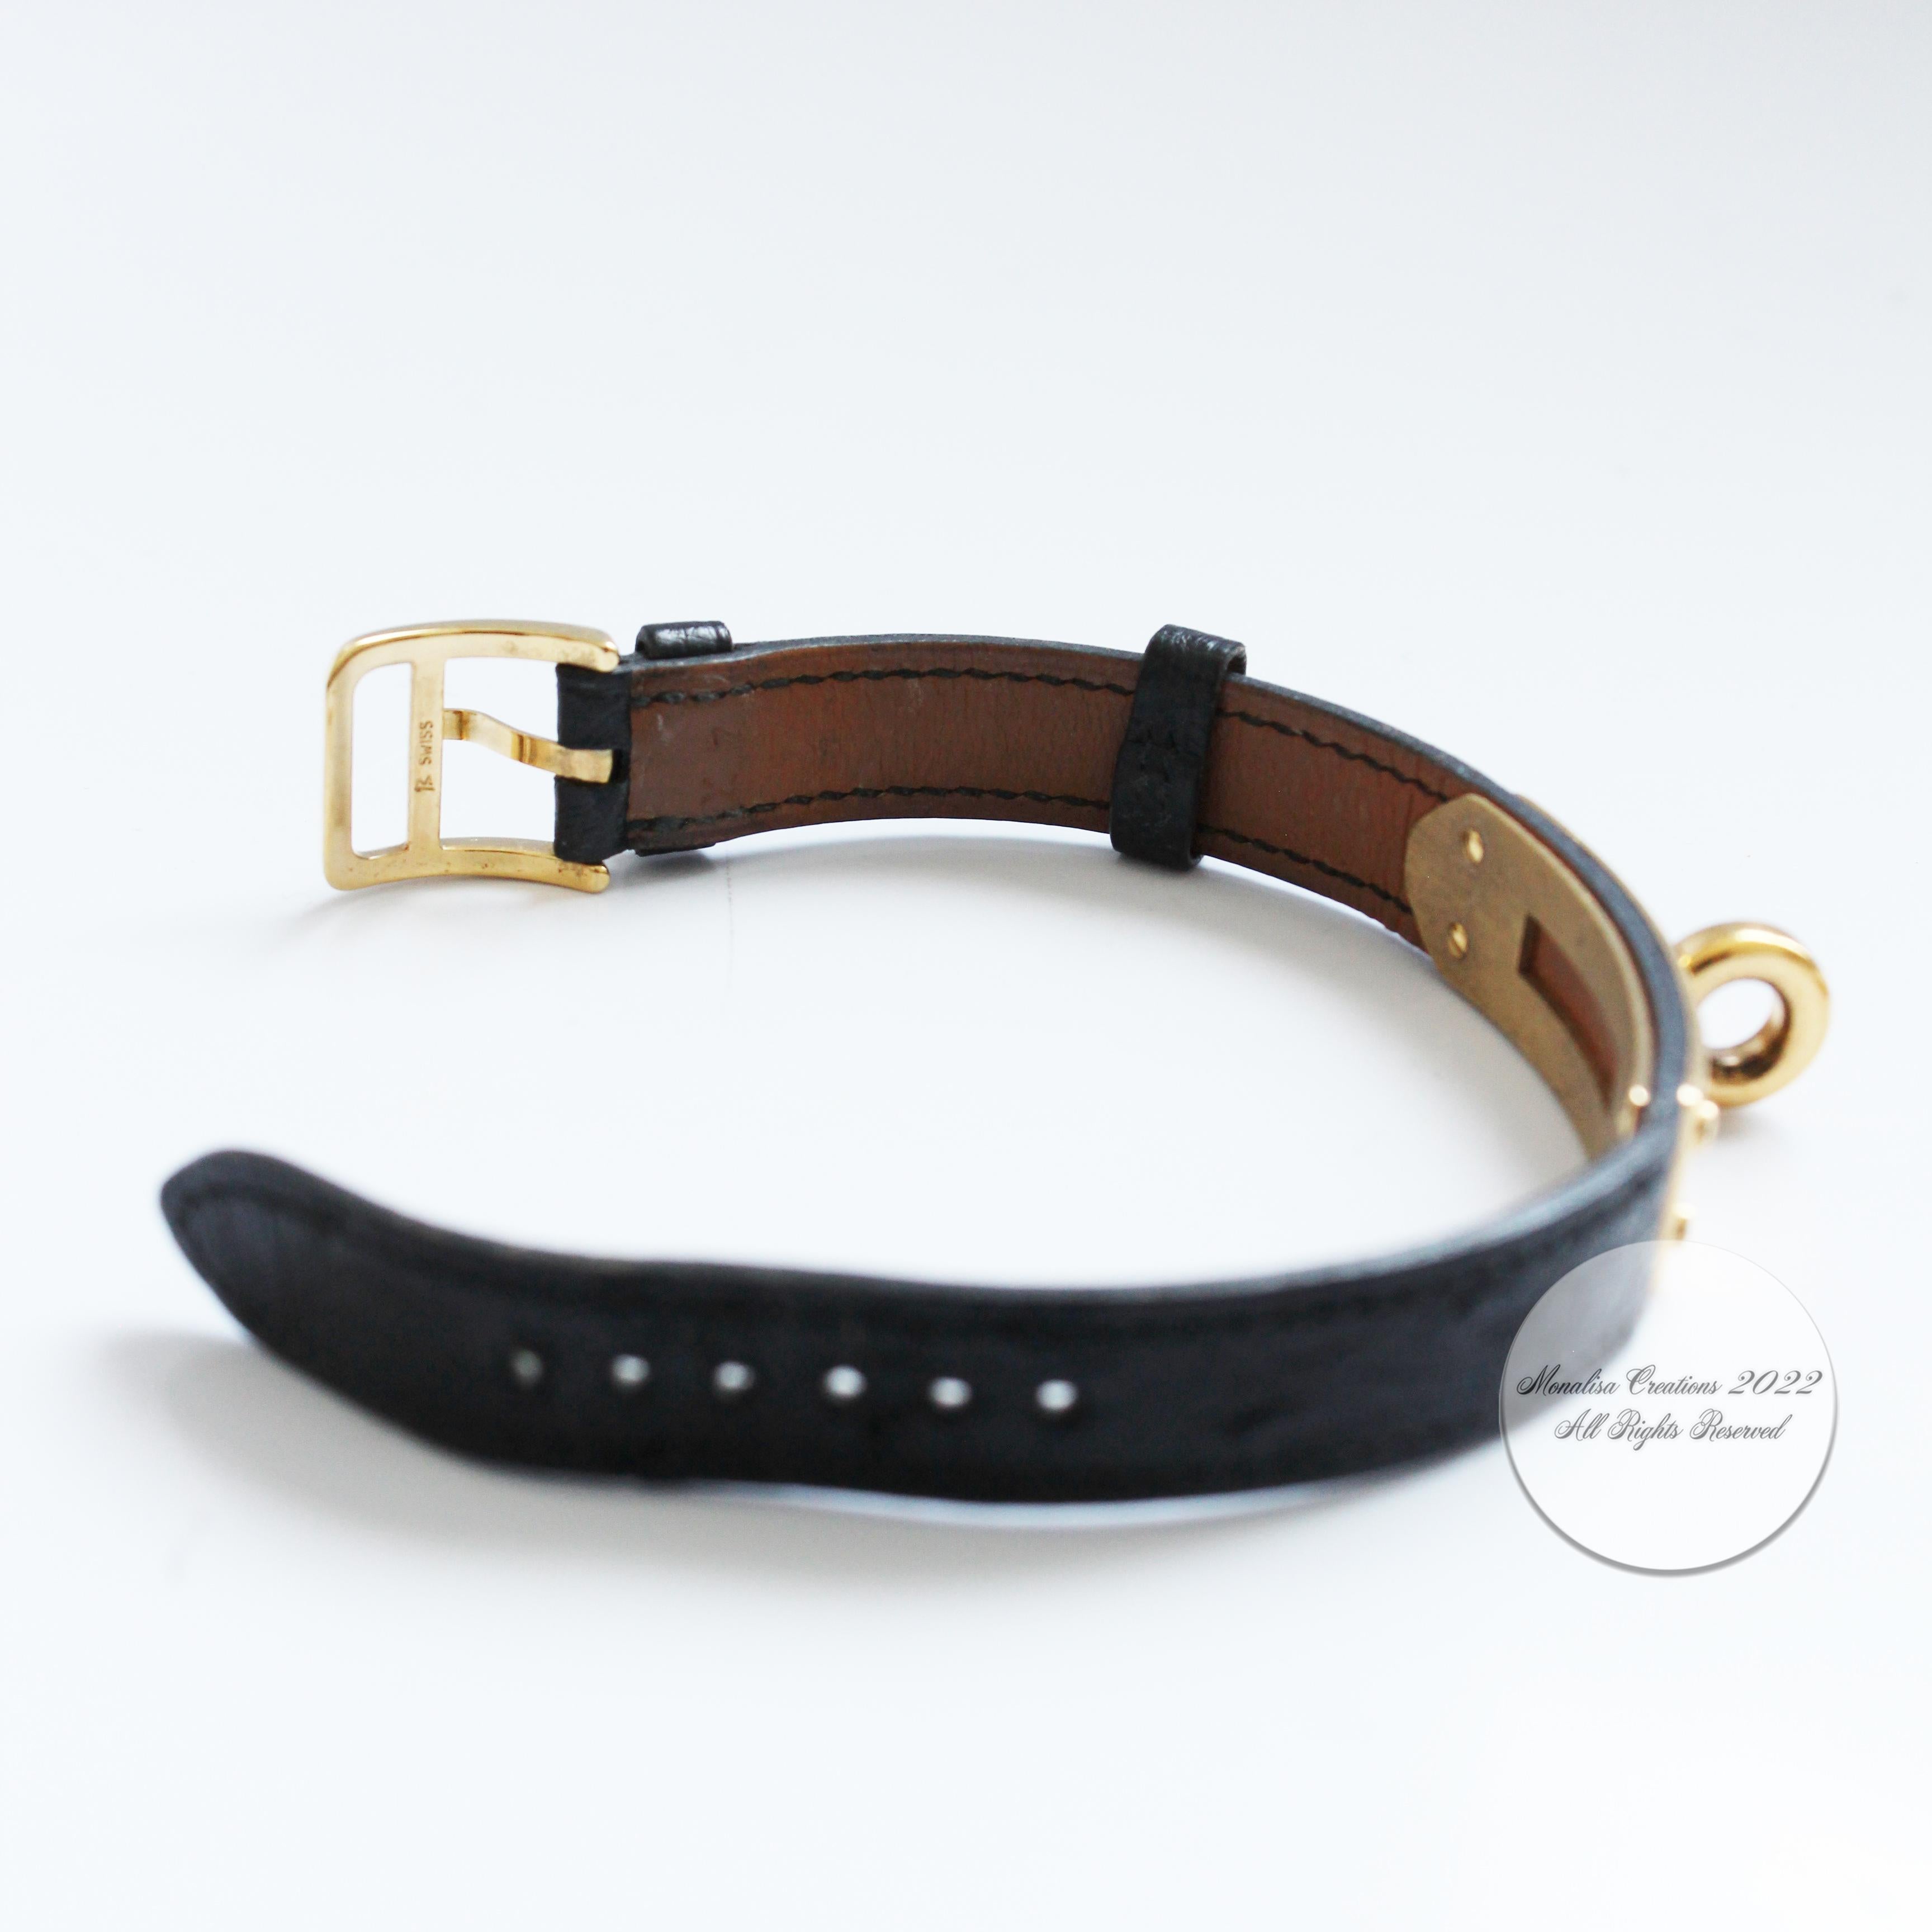 Contemporary Hermes Kelly Watch Gold Cadena Lock Black Chèvre Mysore Leather Strap 1990s For Sale